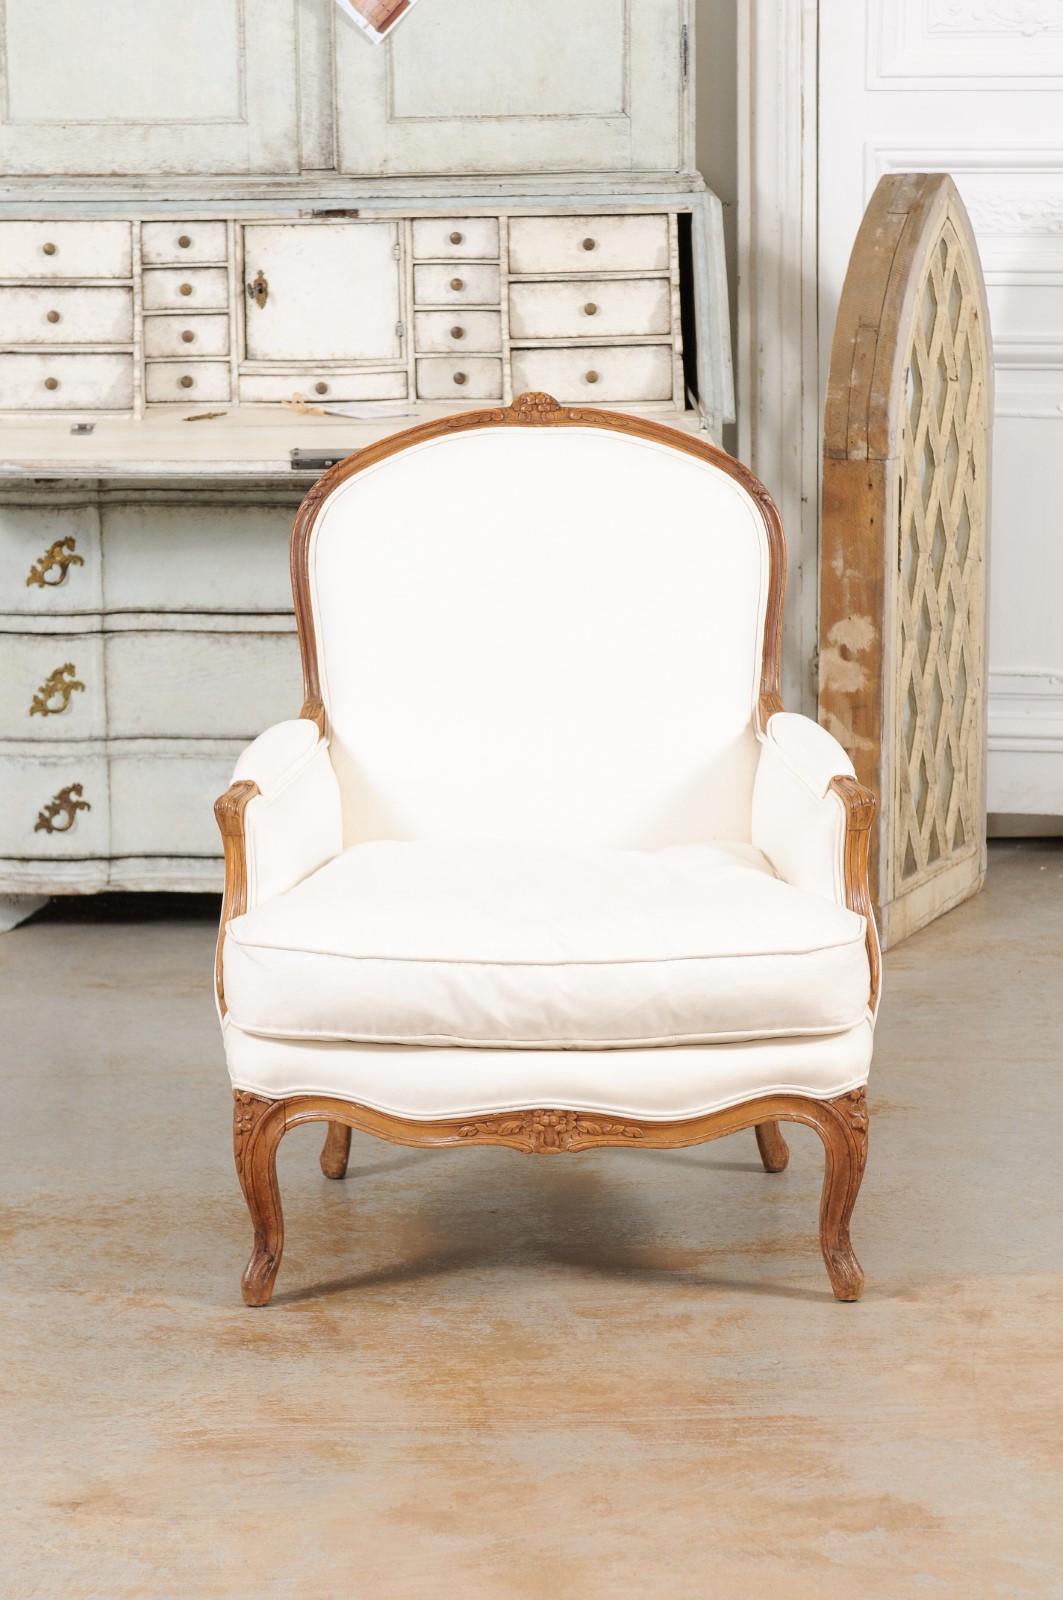 A French Louis XV style bergère chair from the 19th century, with carved floral motifs and new upholstery. Created in France during the 19th century, this Louis XV style wooden bergère features a slightly slanted back with carved flowers on the